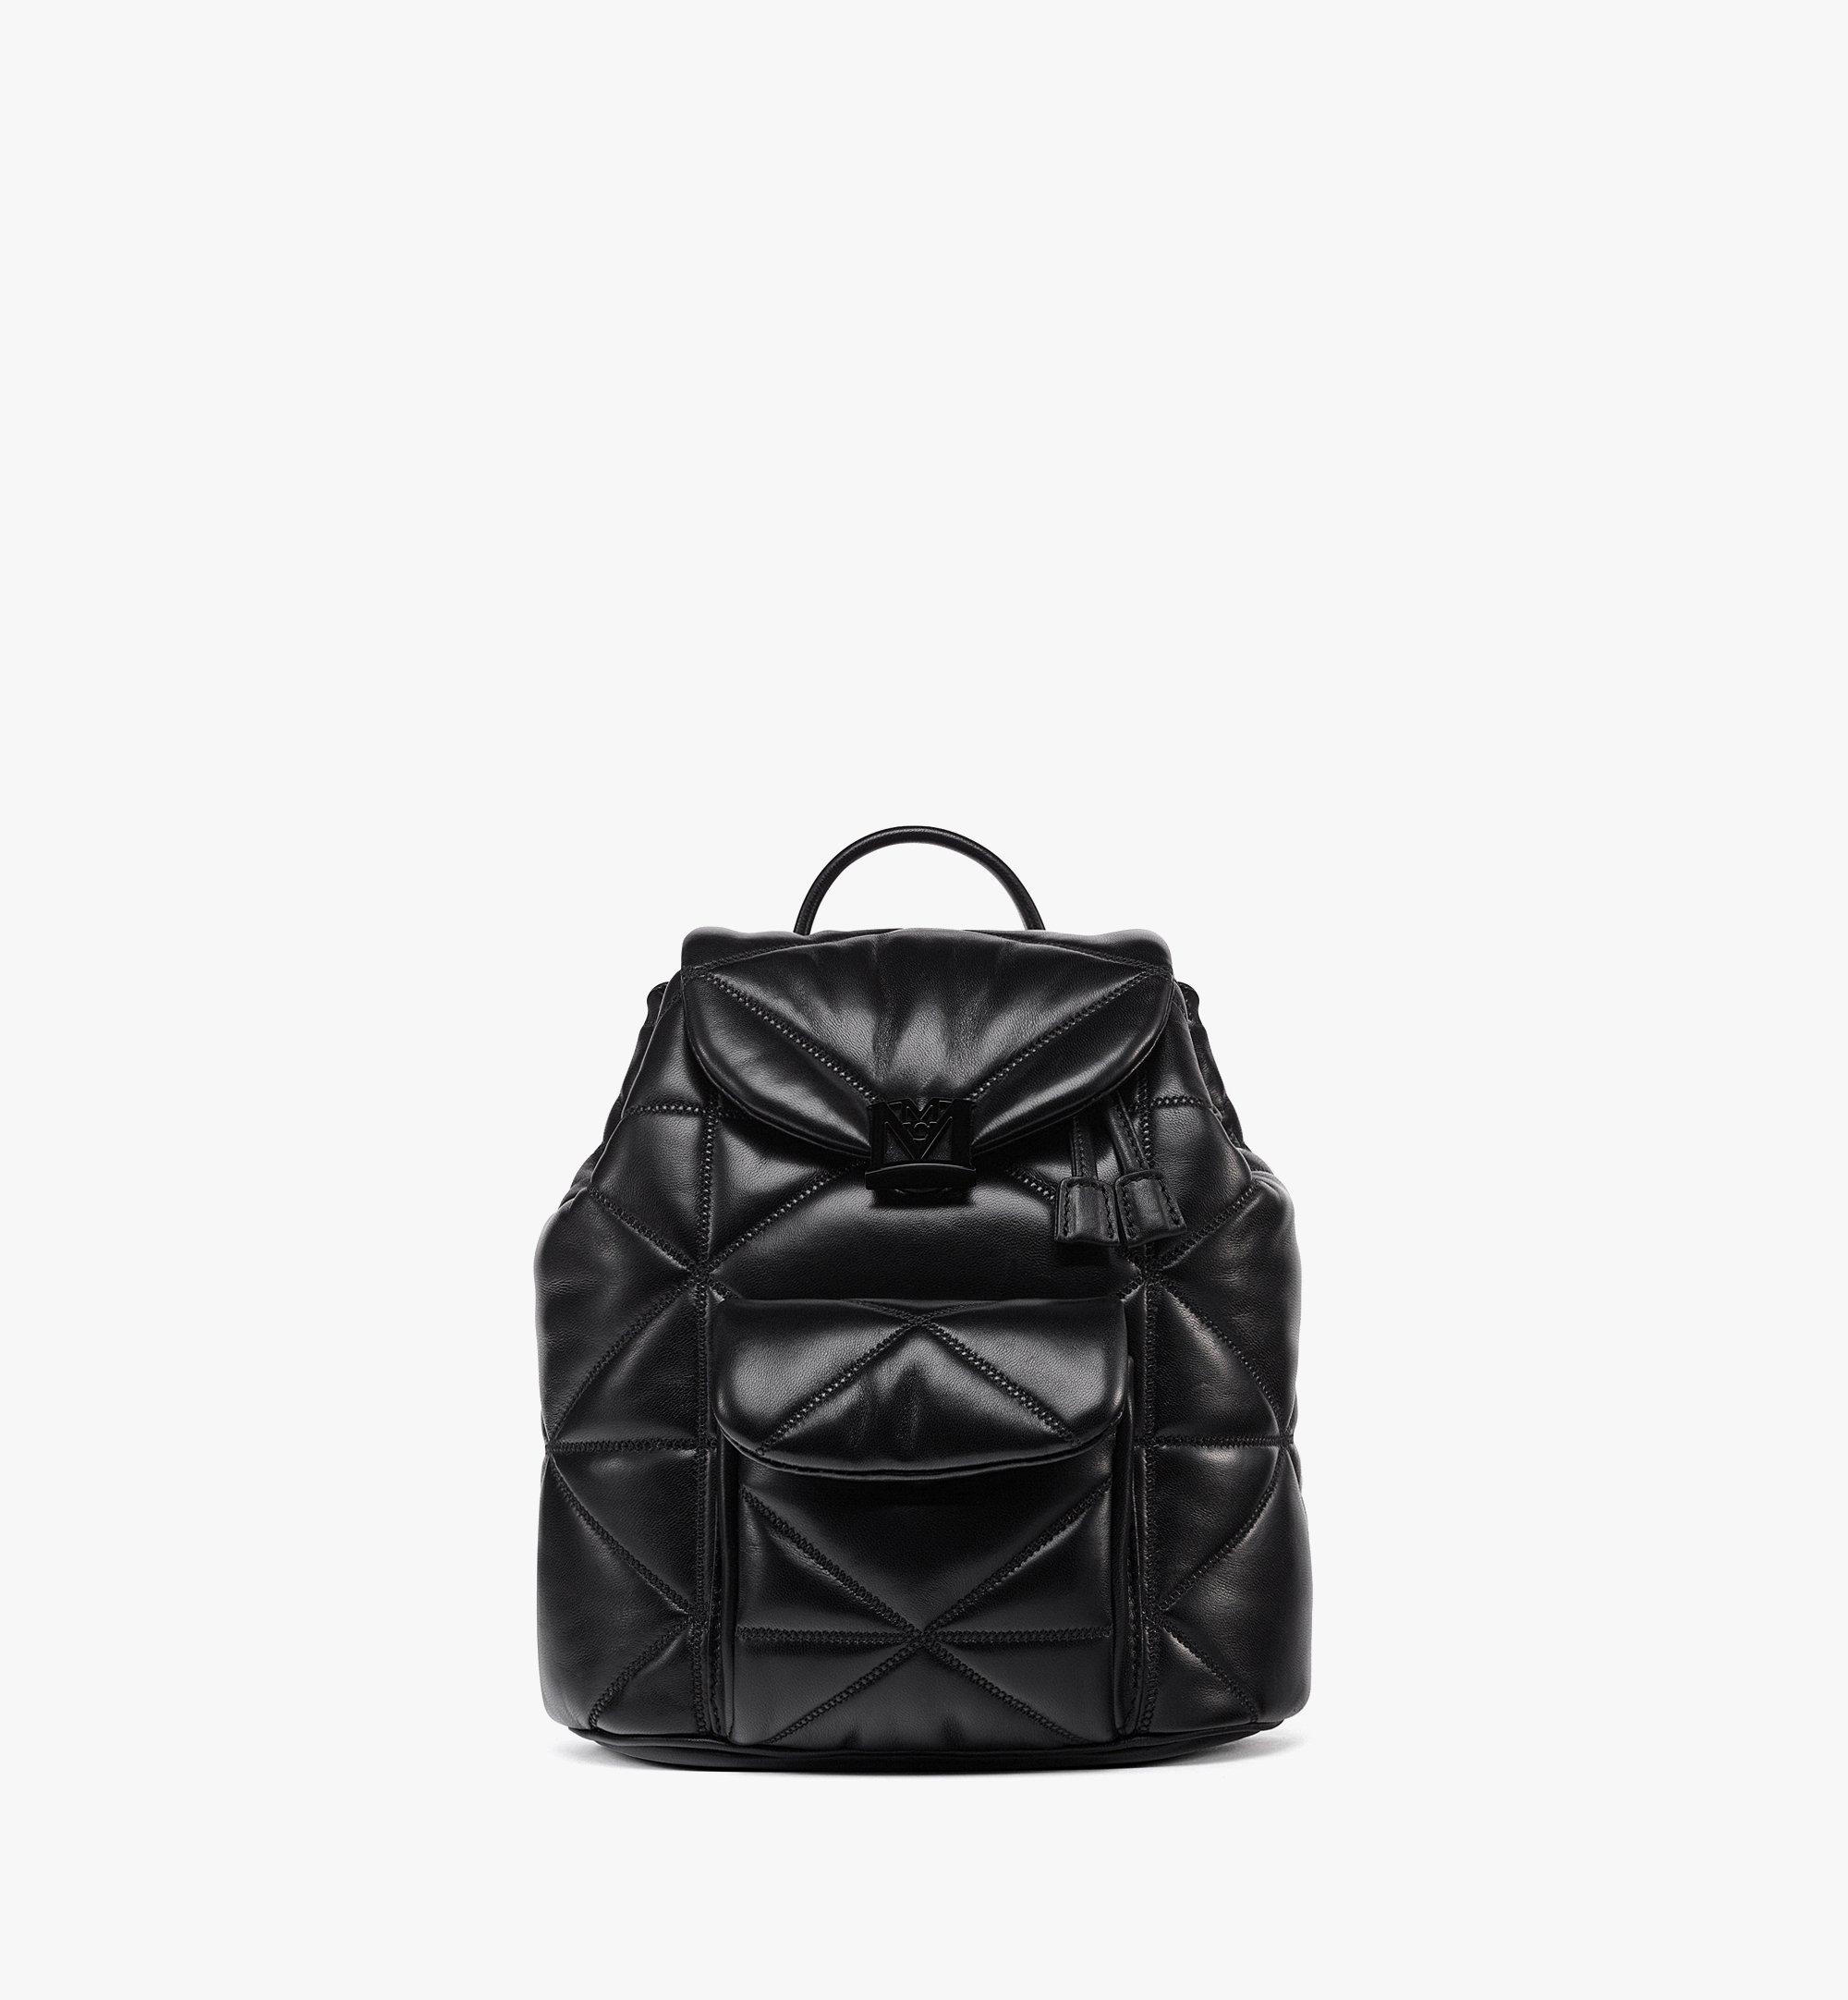 MCM Backpacks, The best prices online in Malaysia